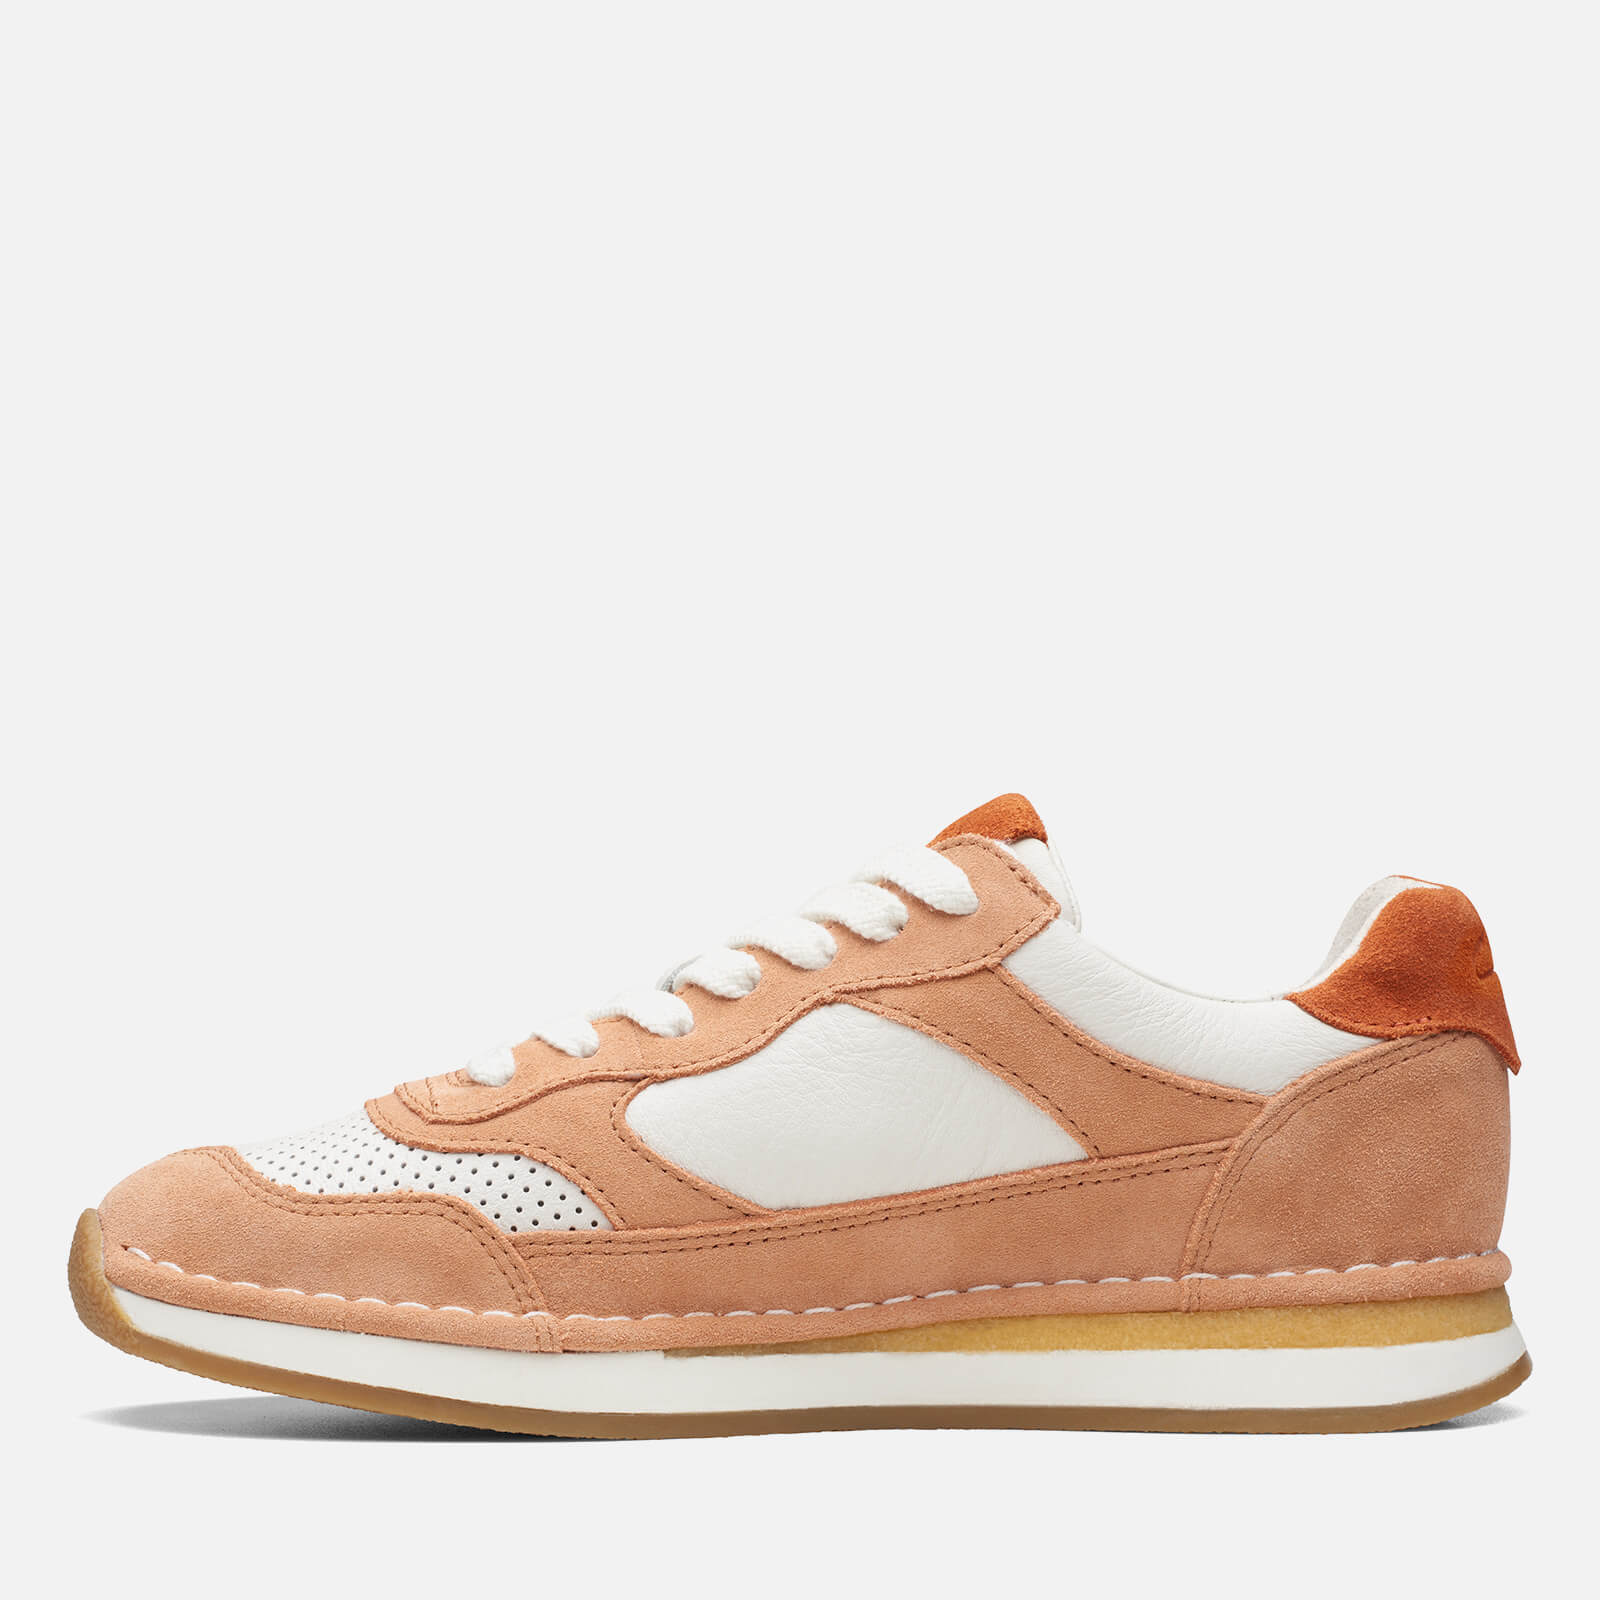 clarks craft run tor suede and leather trainers - uk 3